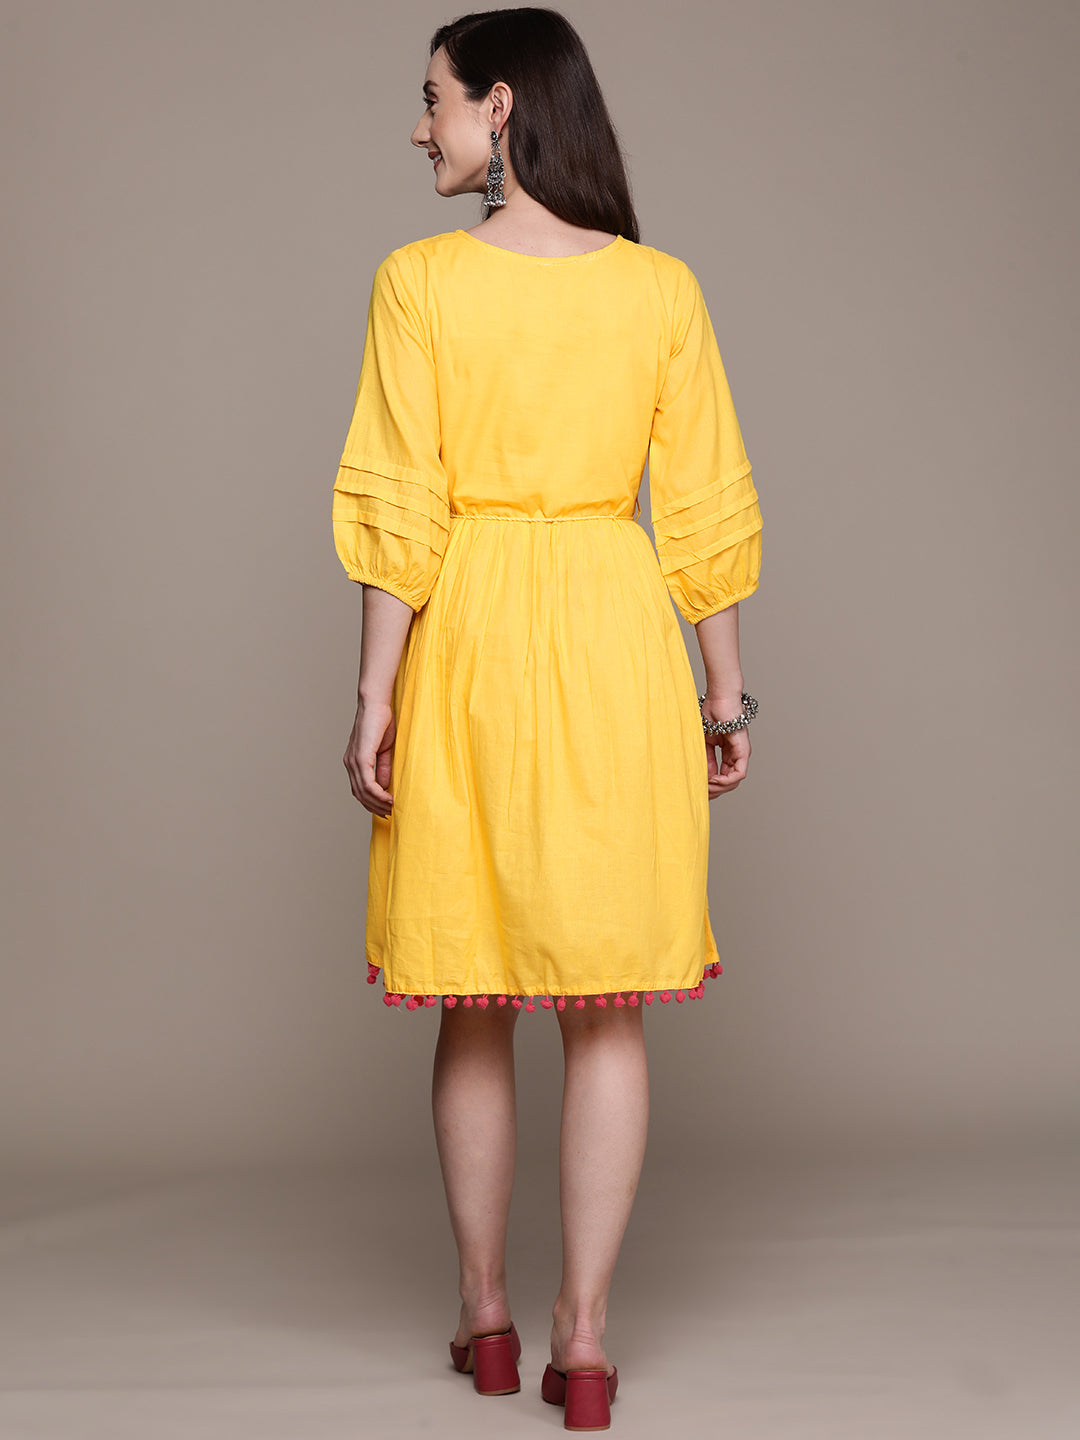 Ishin Women's Yellow Embroidered A-Line Dress